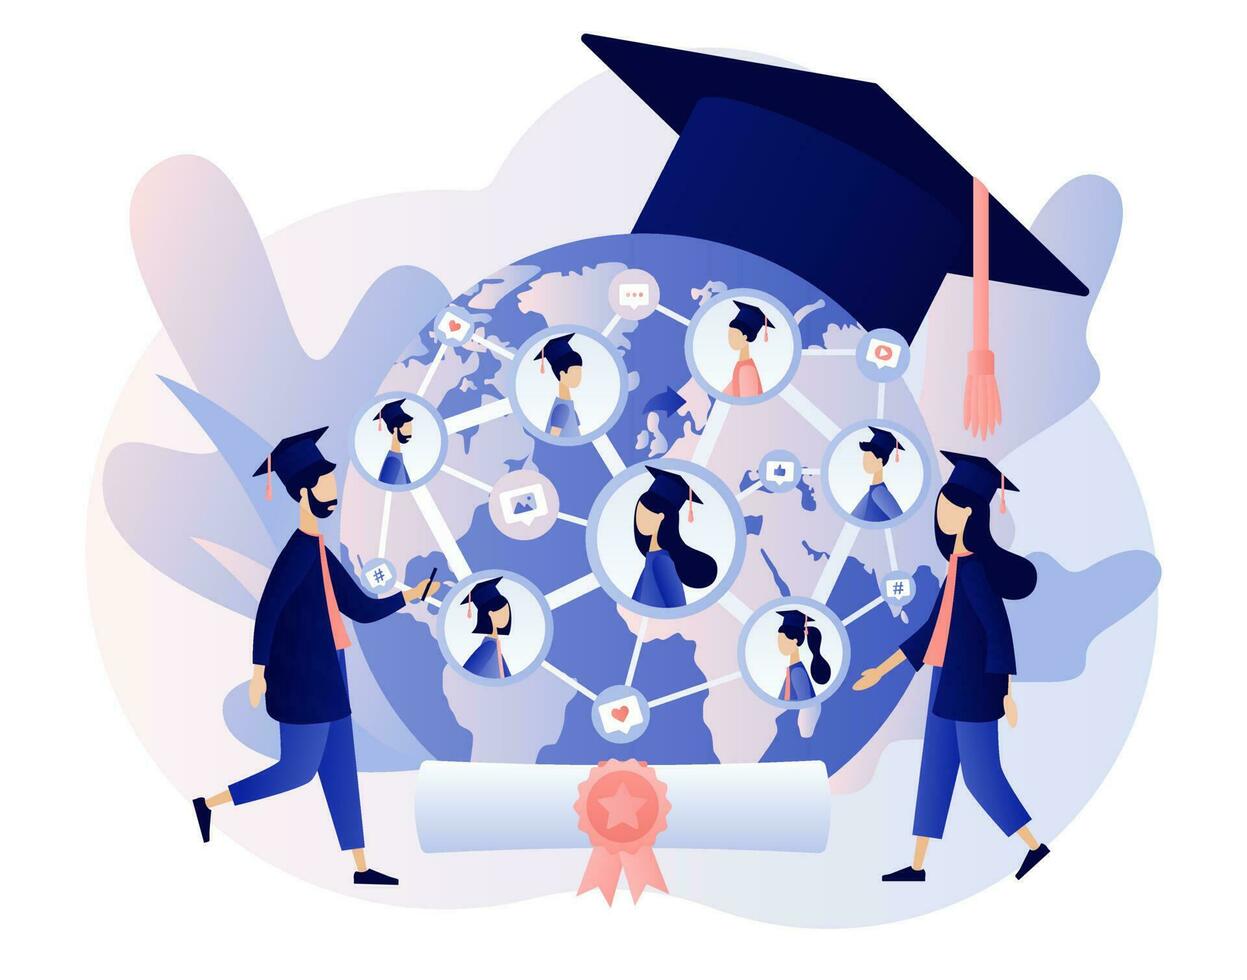 Online graduation. Graduates all over World receive diplomas and communicate via video. Online education at social distancing. Modern flat cartoon style. Vector illustration on white background